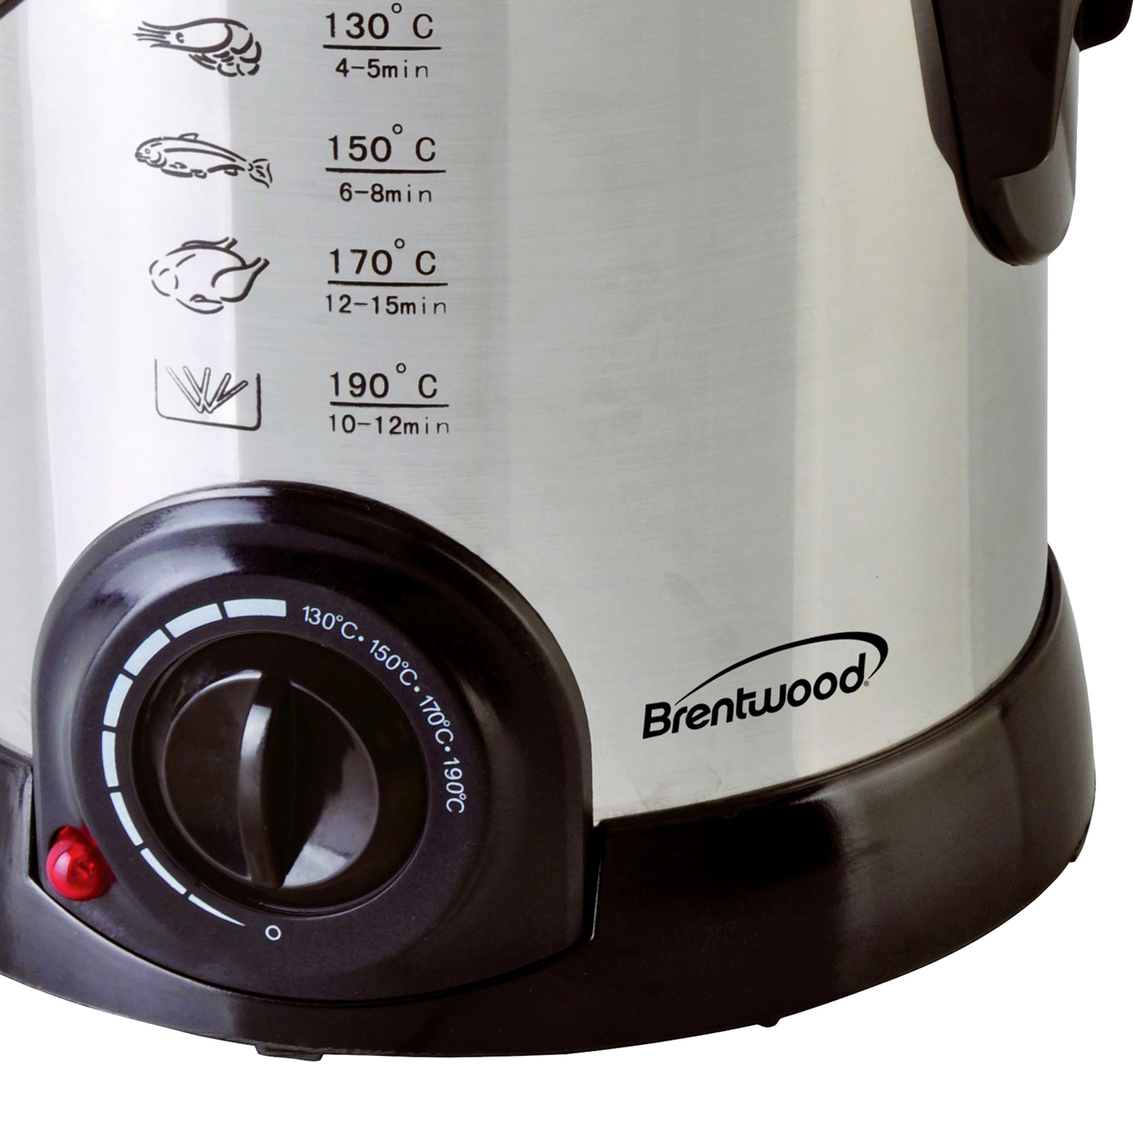 Brentwood 1L Stainless Steel Electric Deep Fryer - Image 4 of 4